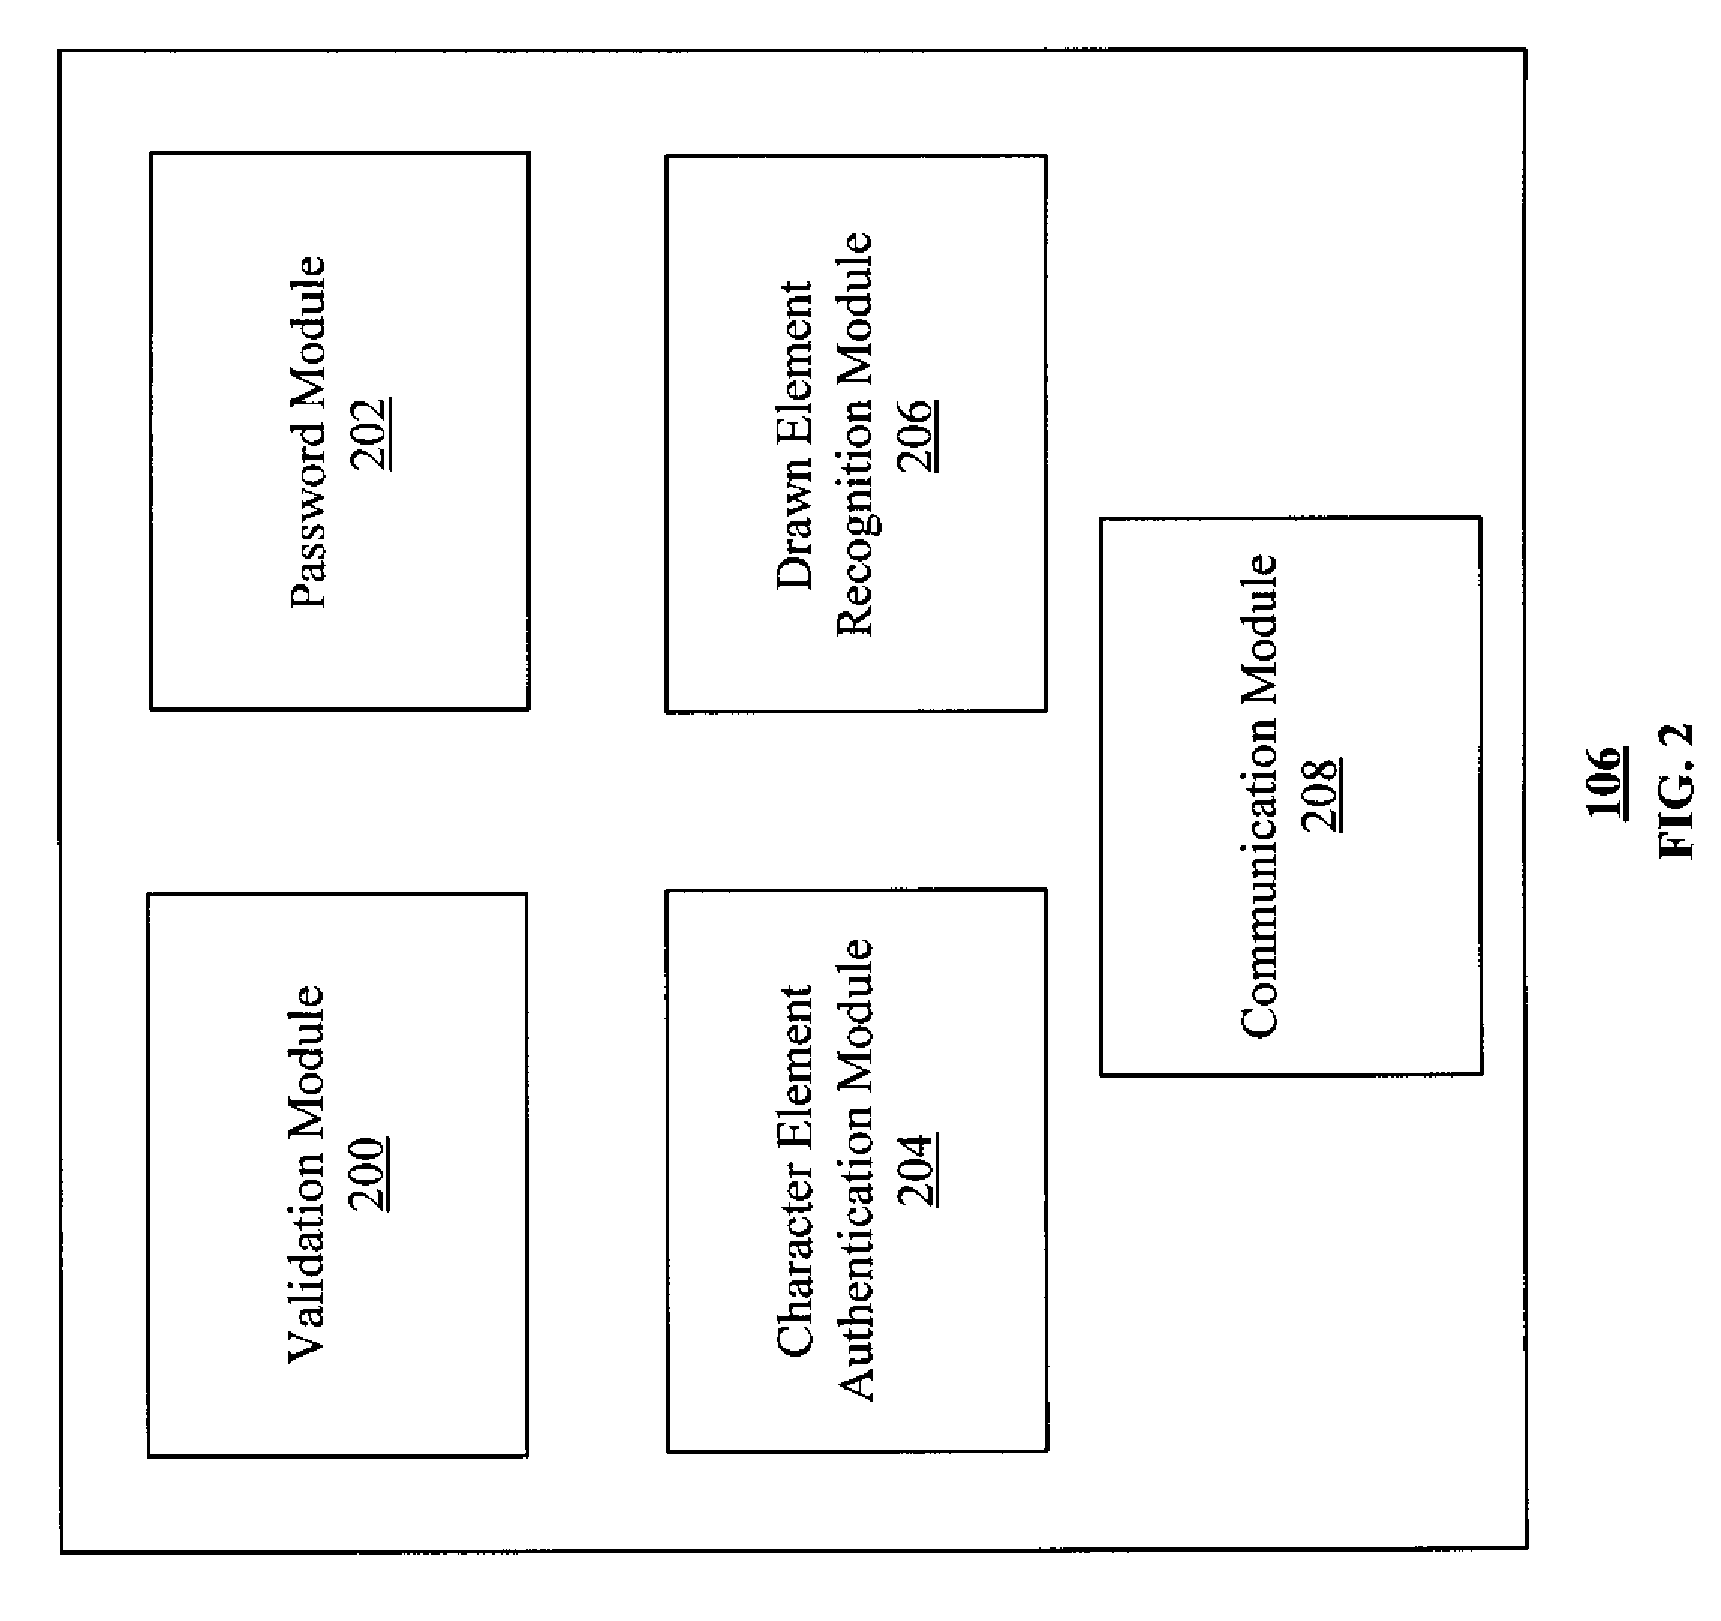 System for and method of providing secure sign-in on a touch screen device